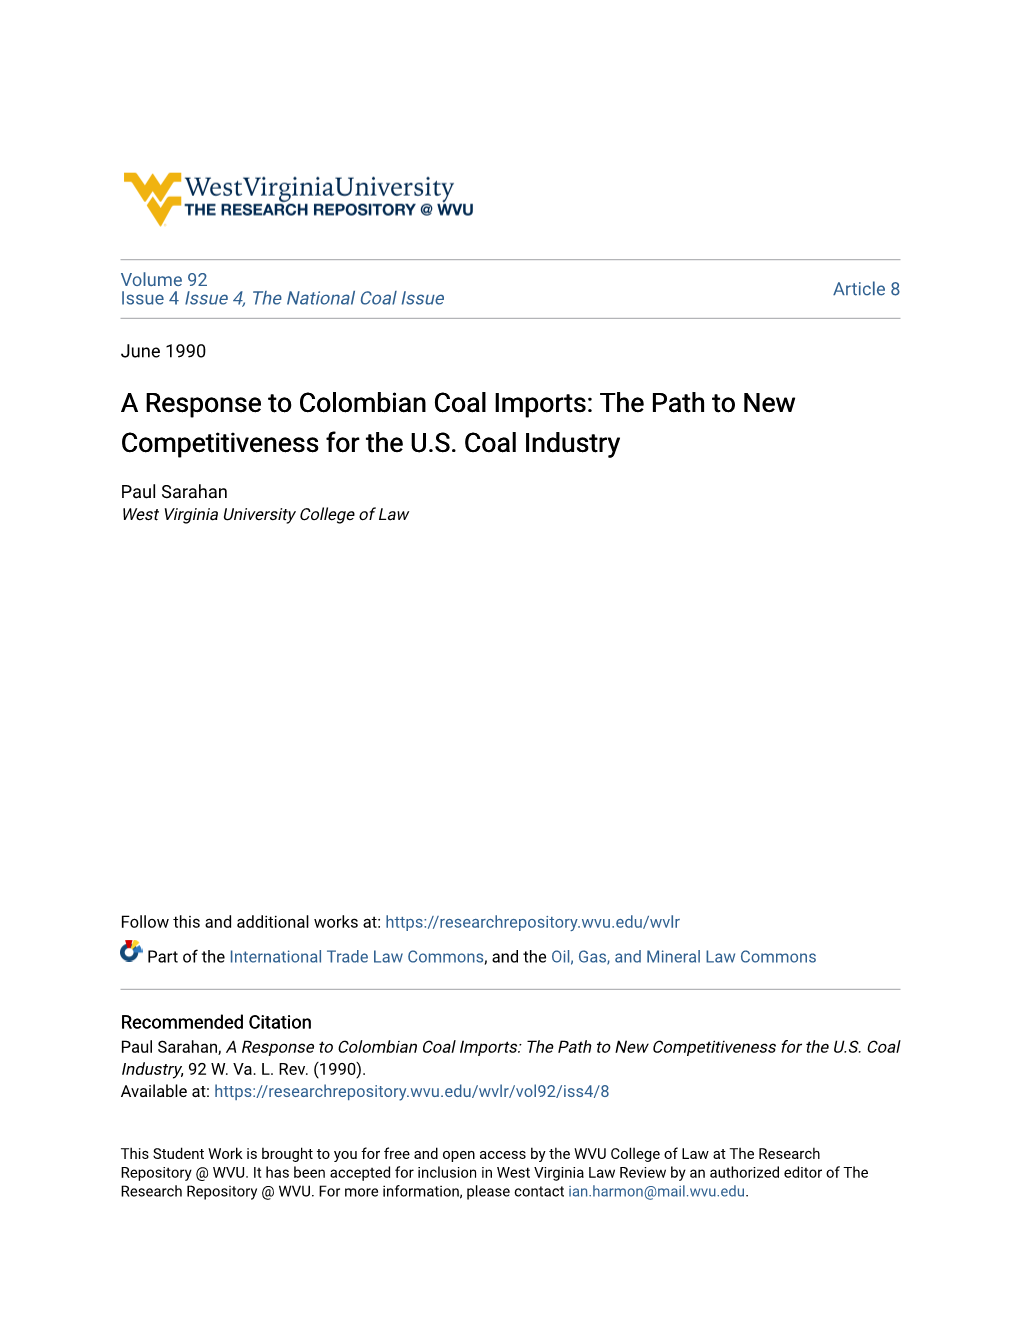 A Response to Colombian Coal Imports: the Path to New Competitiveness for the U.S